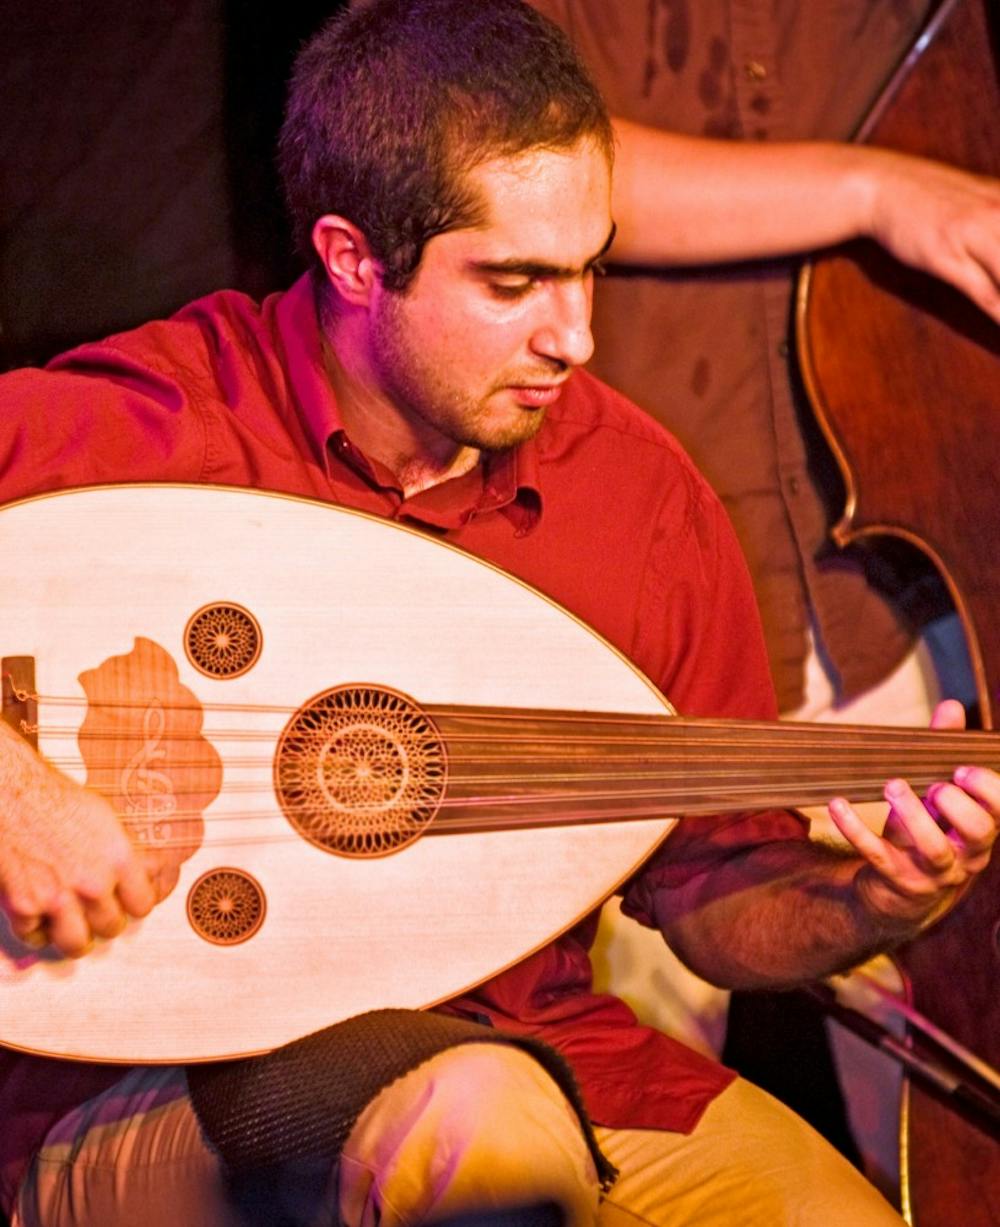 	<p>Igor Houwat of Wisaal, an East Lansing based Arabic fusion group, plays the oud while performing in (<span class="caps">SCENE</span>) Metrospace, 110 Charles Street, East Lansing.  The oud is an Arabic lute which, along with the percussion and bass instruments, contributes to the Middle Eastern tones of the group&#8217;s captivating repertoire.</p>